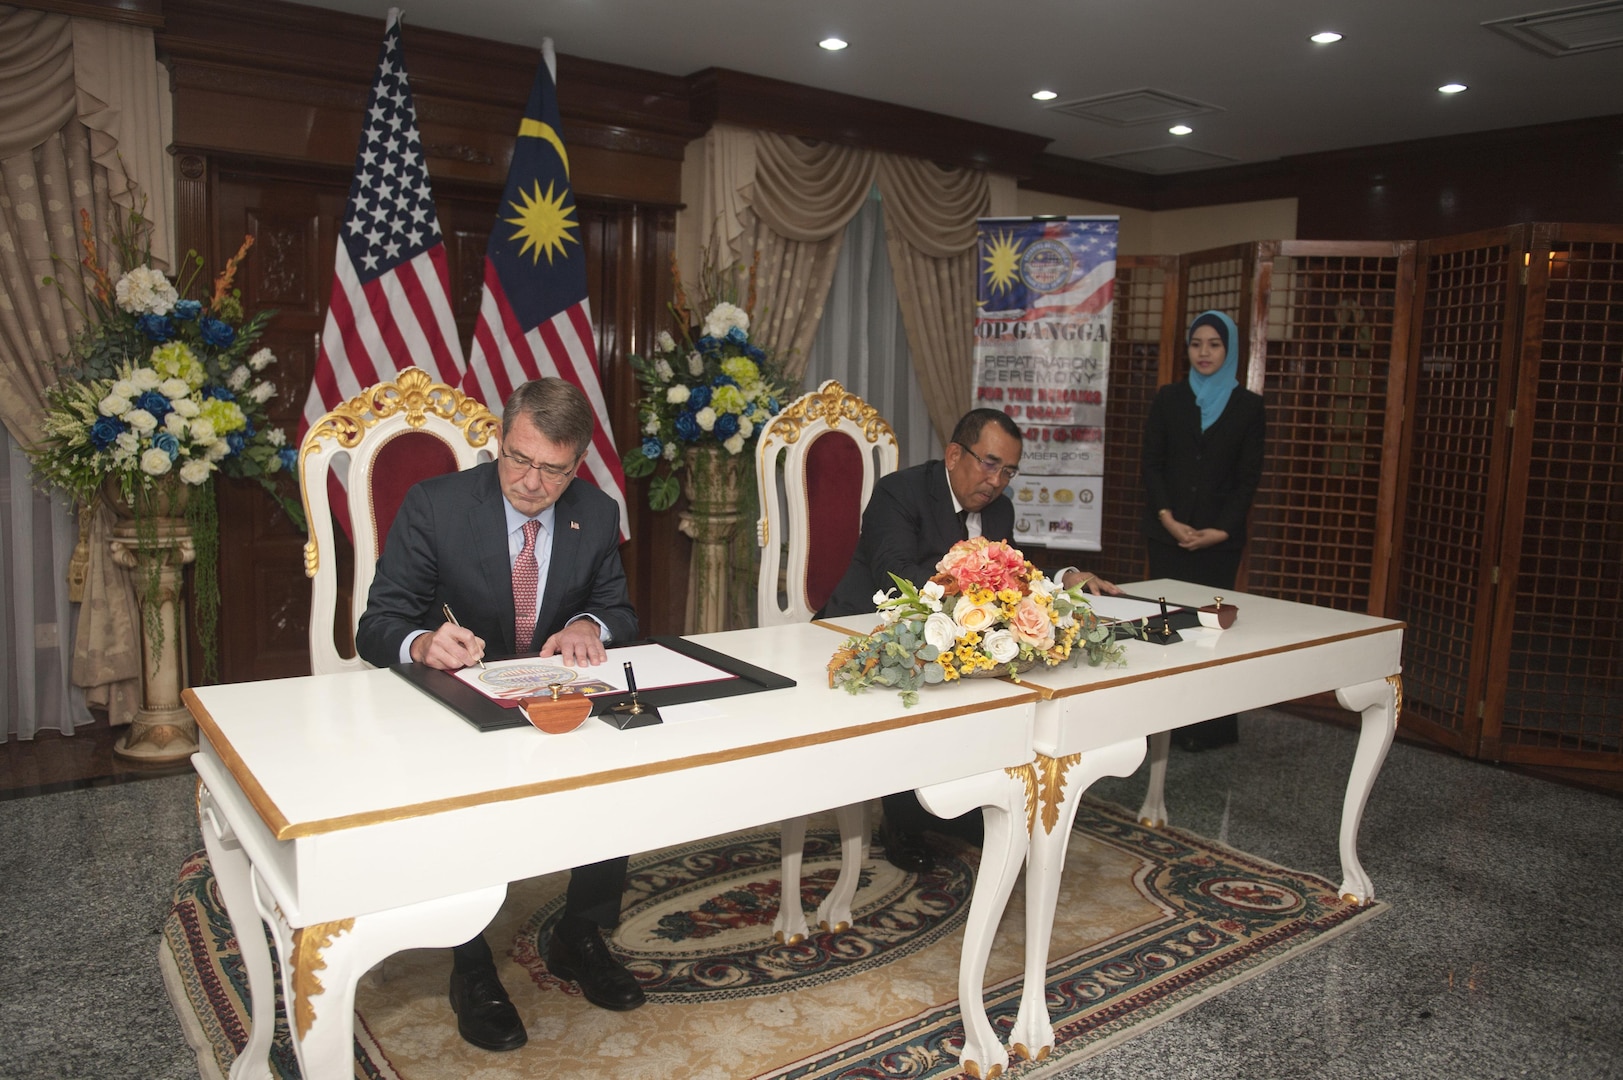 U.S. Secretary of Defense Ashton Carter and Malaysia Deputy Defense Minister Dato’ Wira Mohd Johari Bin Baharum officially sign documents turning over remains of a U.S. service member prior to a repatriation ceremony at Subang Air Base, Malaysia, Nov. 5, 2015. The joint effort between the U.S. and Malaysia culminated in a 25-day mission from Aug. 16 through Sept. 9, 2015, at a crash site near Beruas village, Manjung district, Perak state, Malaysia. The mission resulted in the success of finding osseous remains as well as material evidence. The partnership between the two countries marks the first of its kind. The mission of the Defense POW/MIA Accounting Agency is to provide the fullest possible accounting for our missing personnel to their families and the nation. (U.S. Air Force photo by Staff Sgt. Brian J. Valencia)